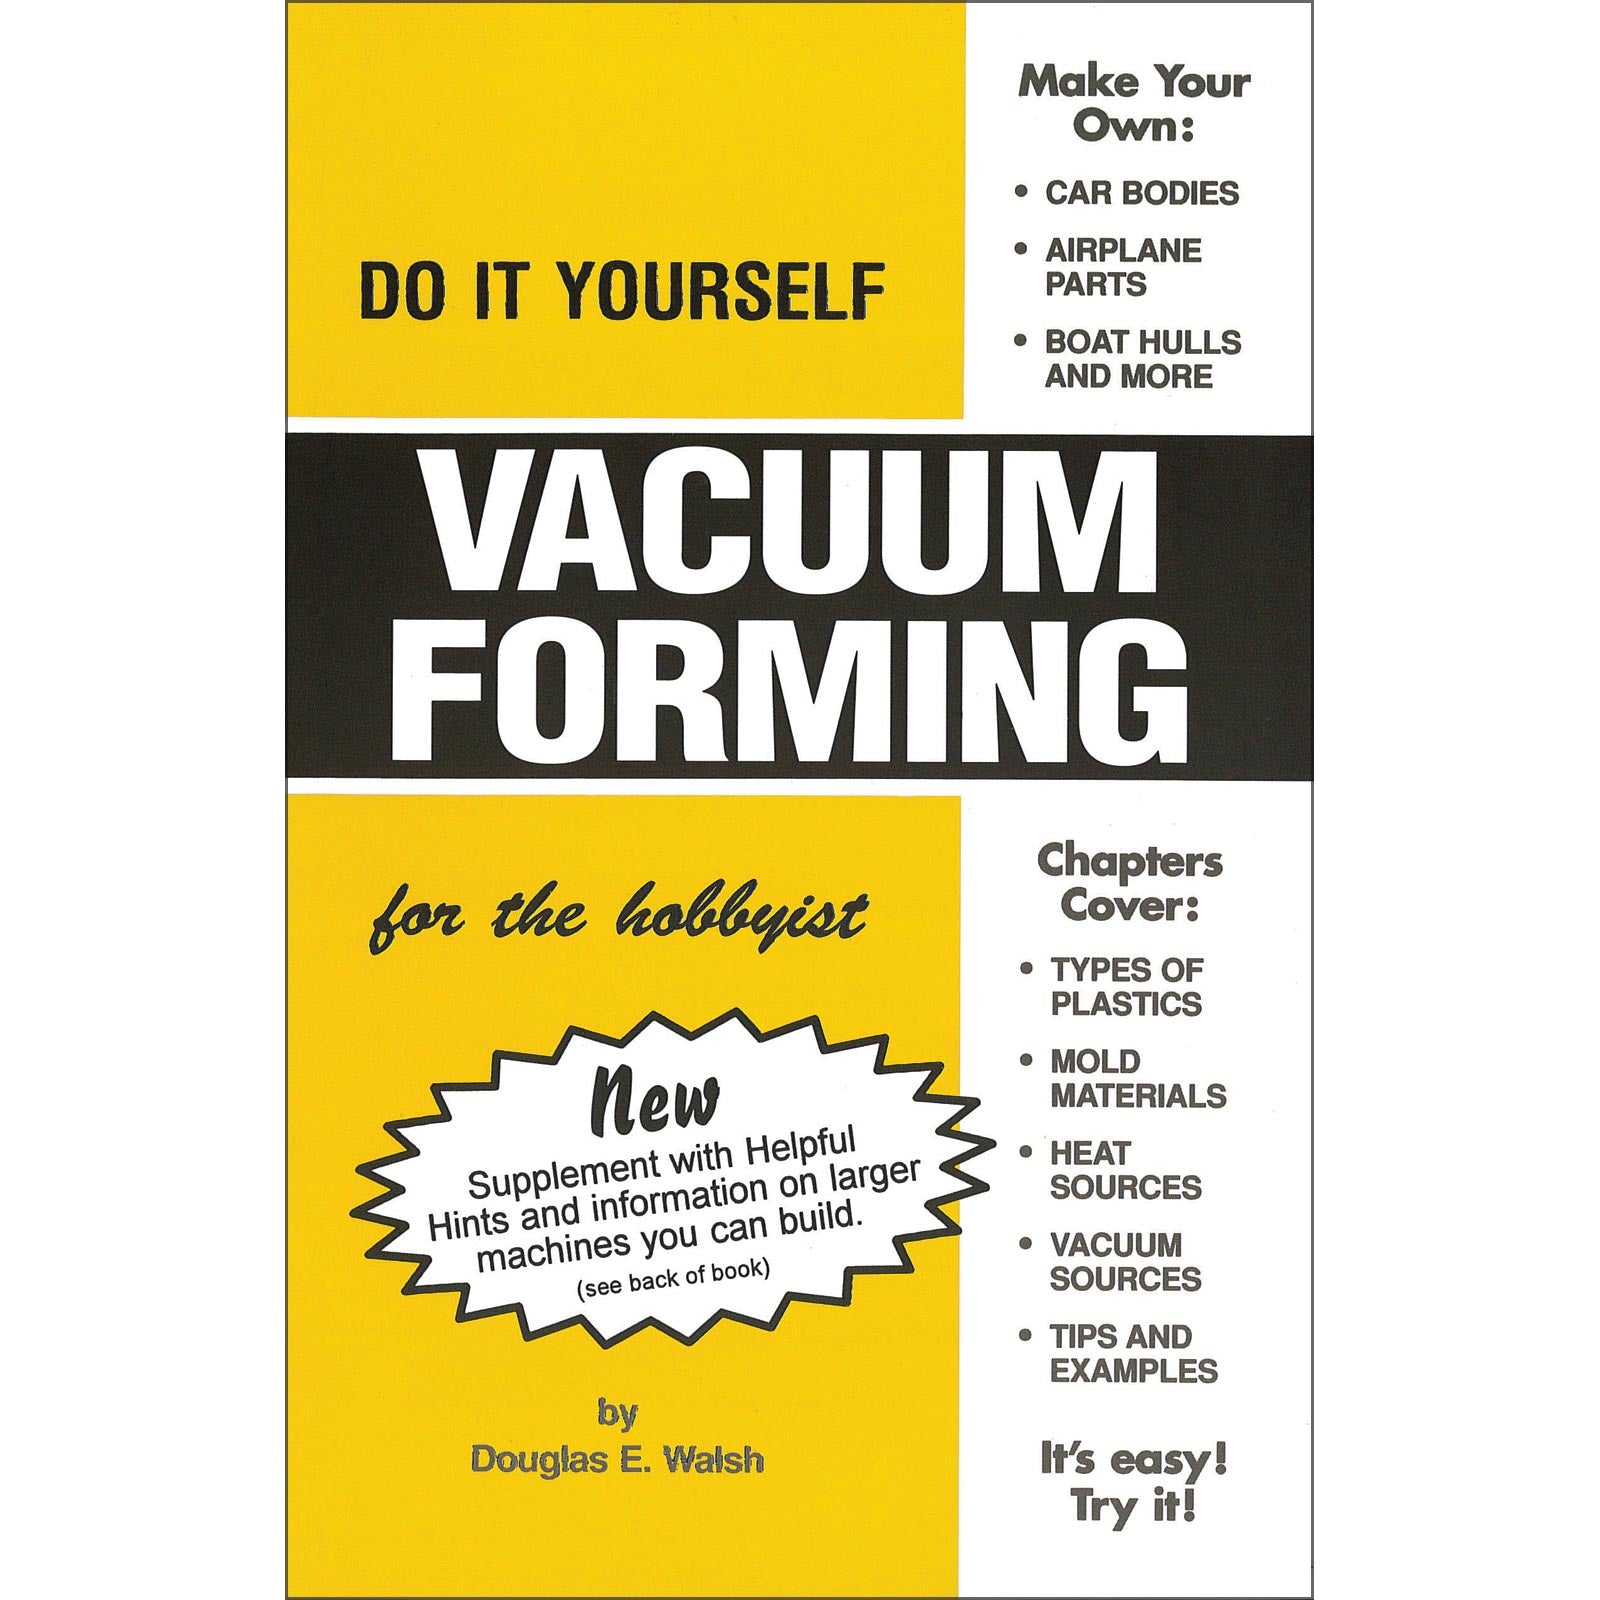 Do It Yourself Vacuum forming for The Hobbyist